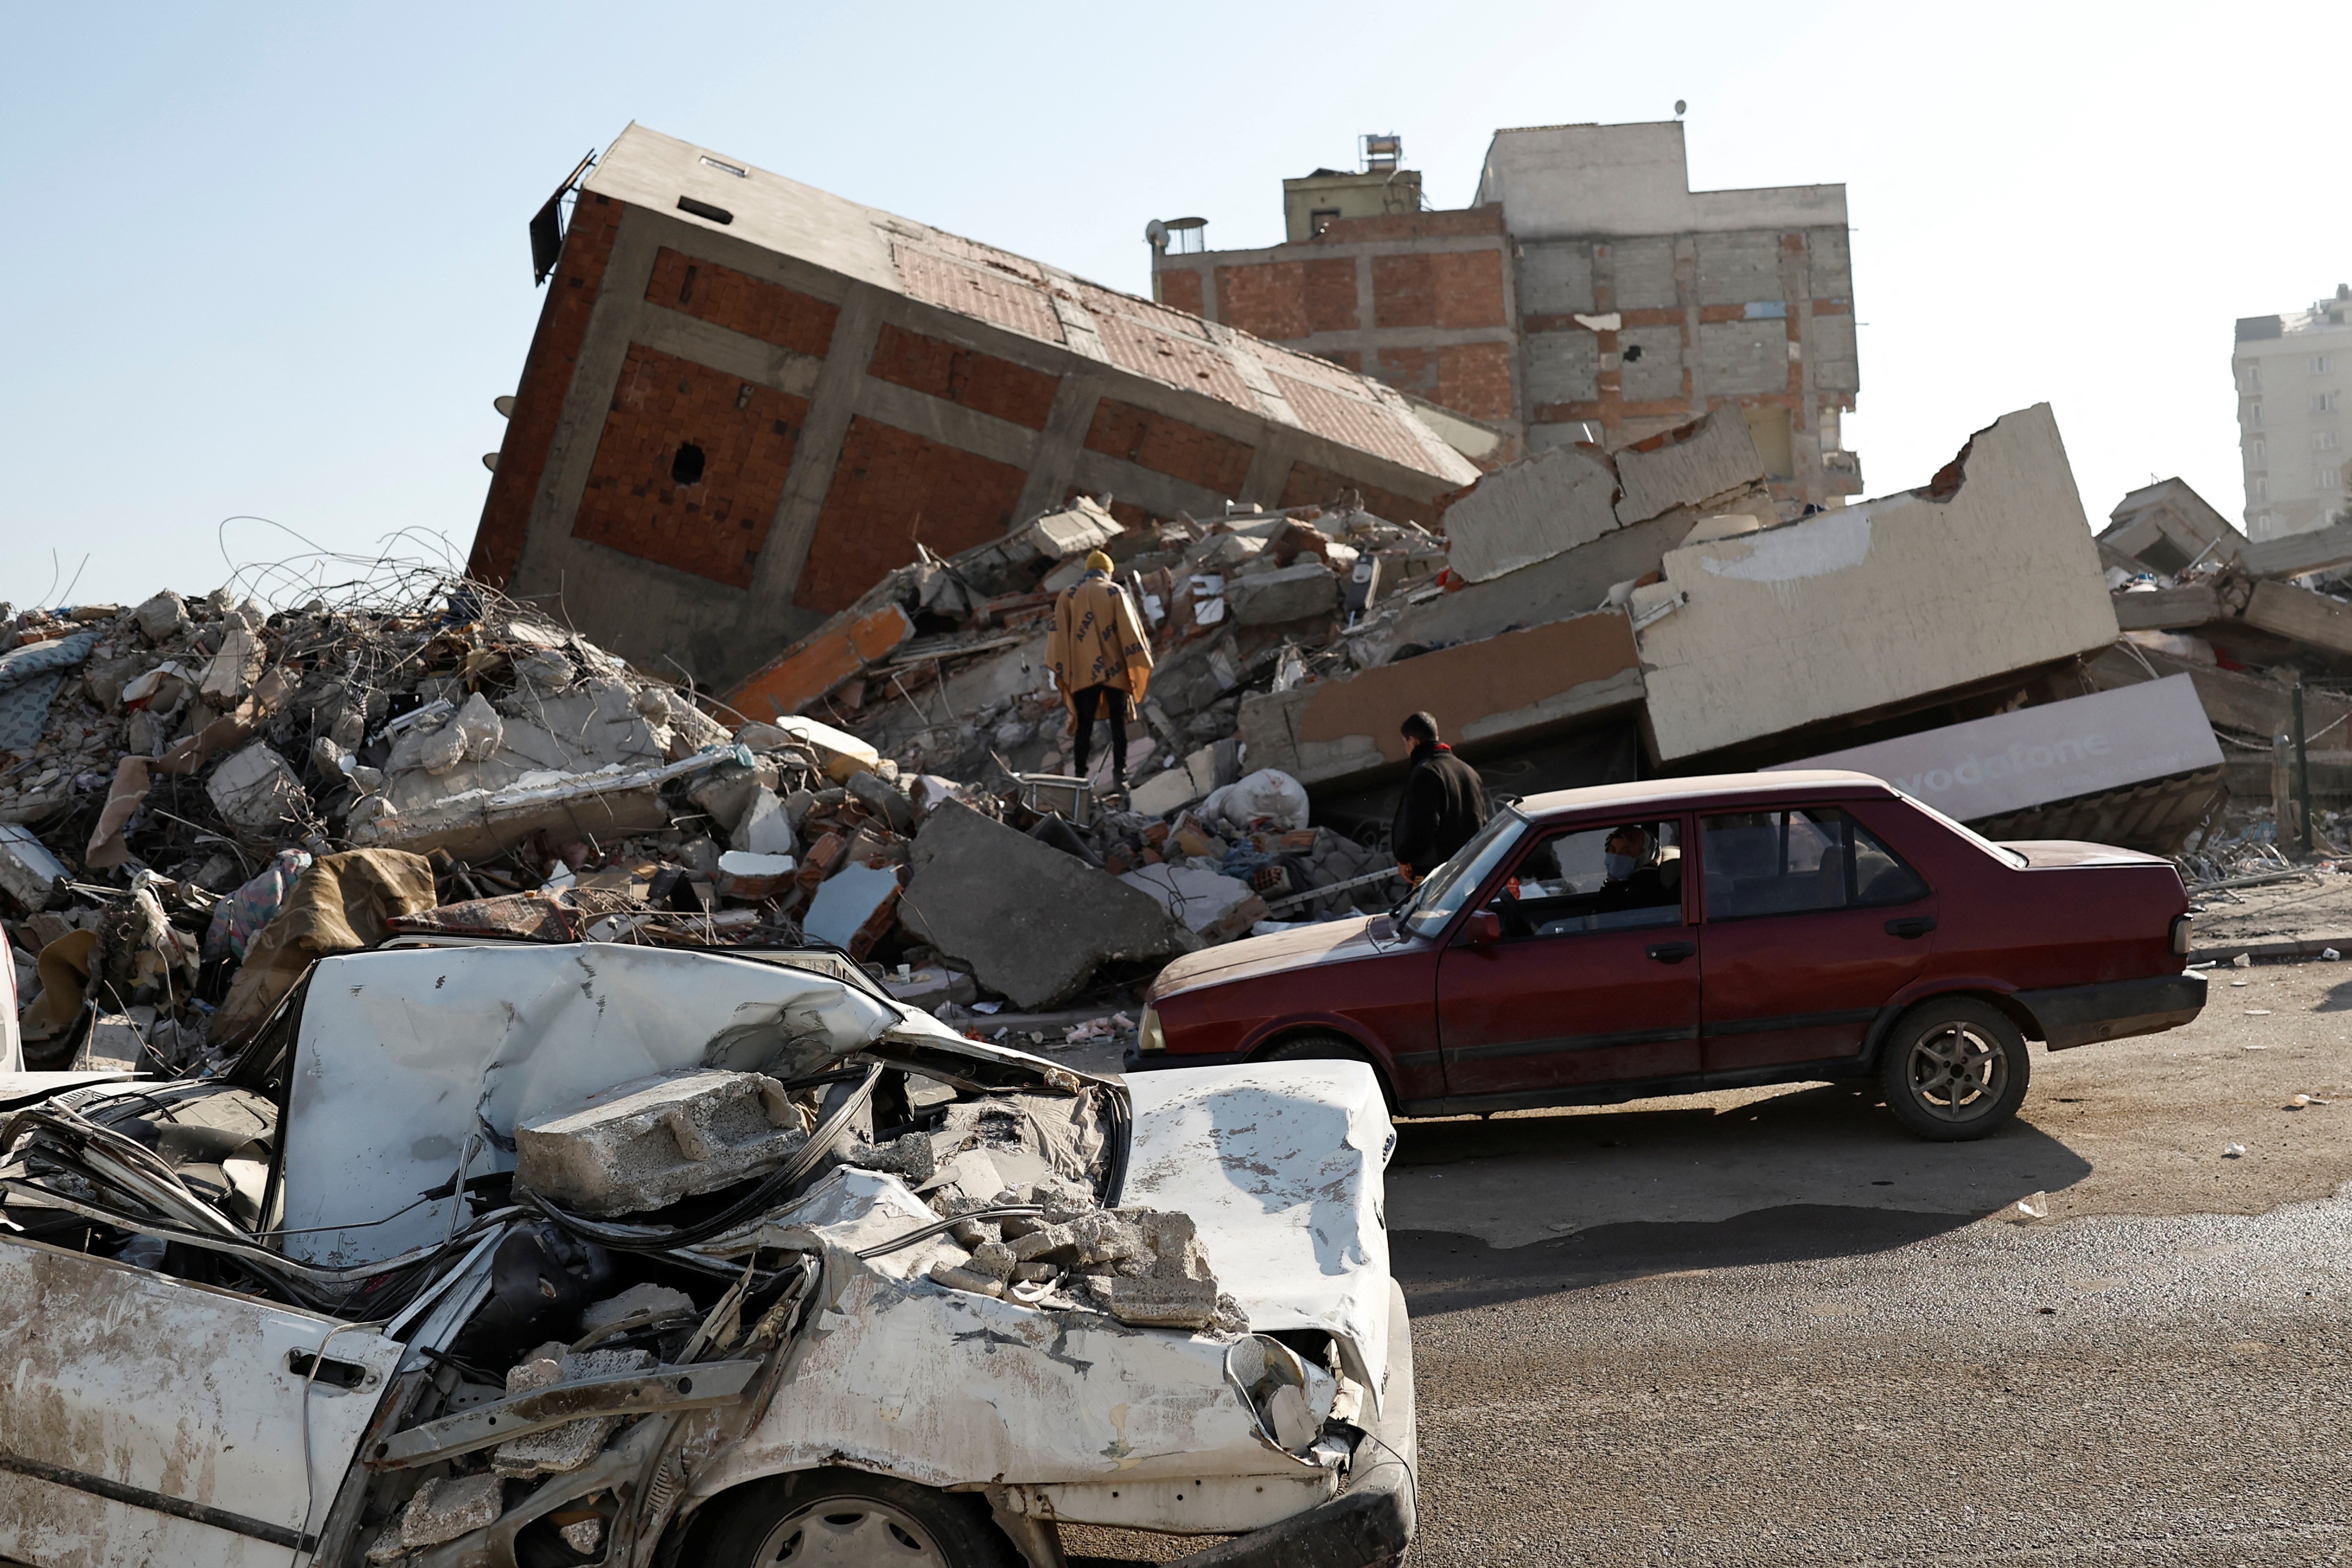 A family parks their car in front of their former home and collects personal belongings they retrieved from the rubble, in the aftermath of a deadly earthquake, in Kahramanmaras, Turkey, February 18 2023. Photo: Reuters